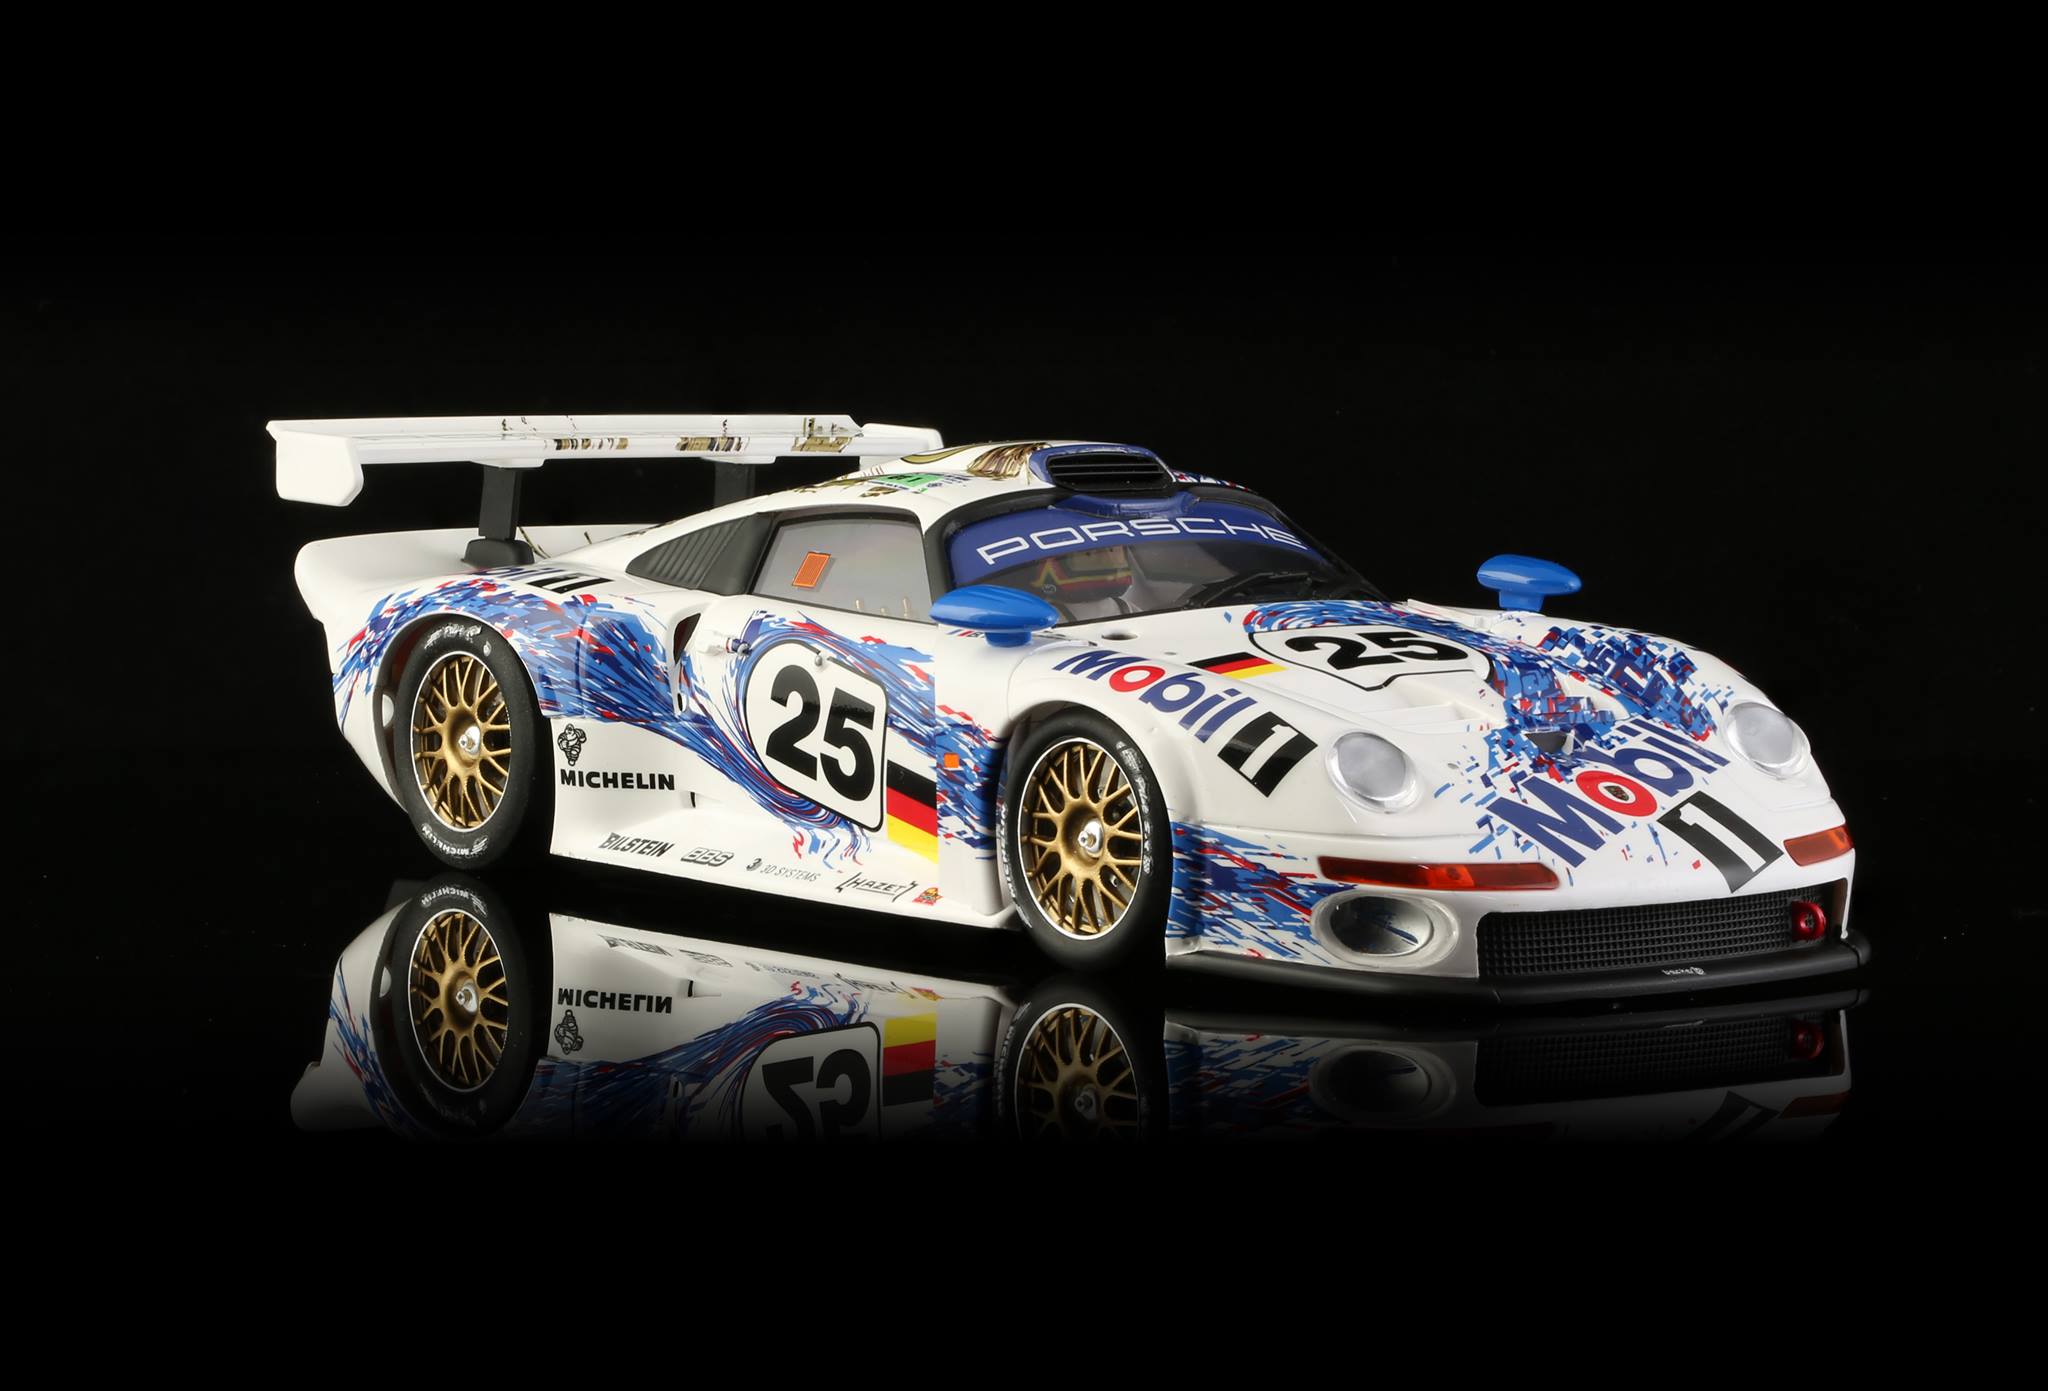 BRM043 Porsche 911 GT1 TEAM Mobil #25 with aluminum chassis